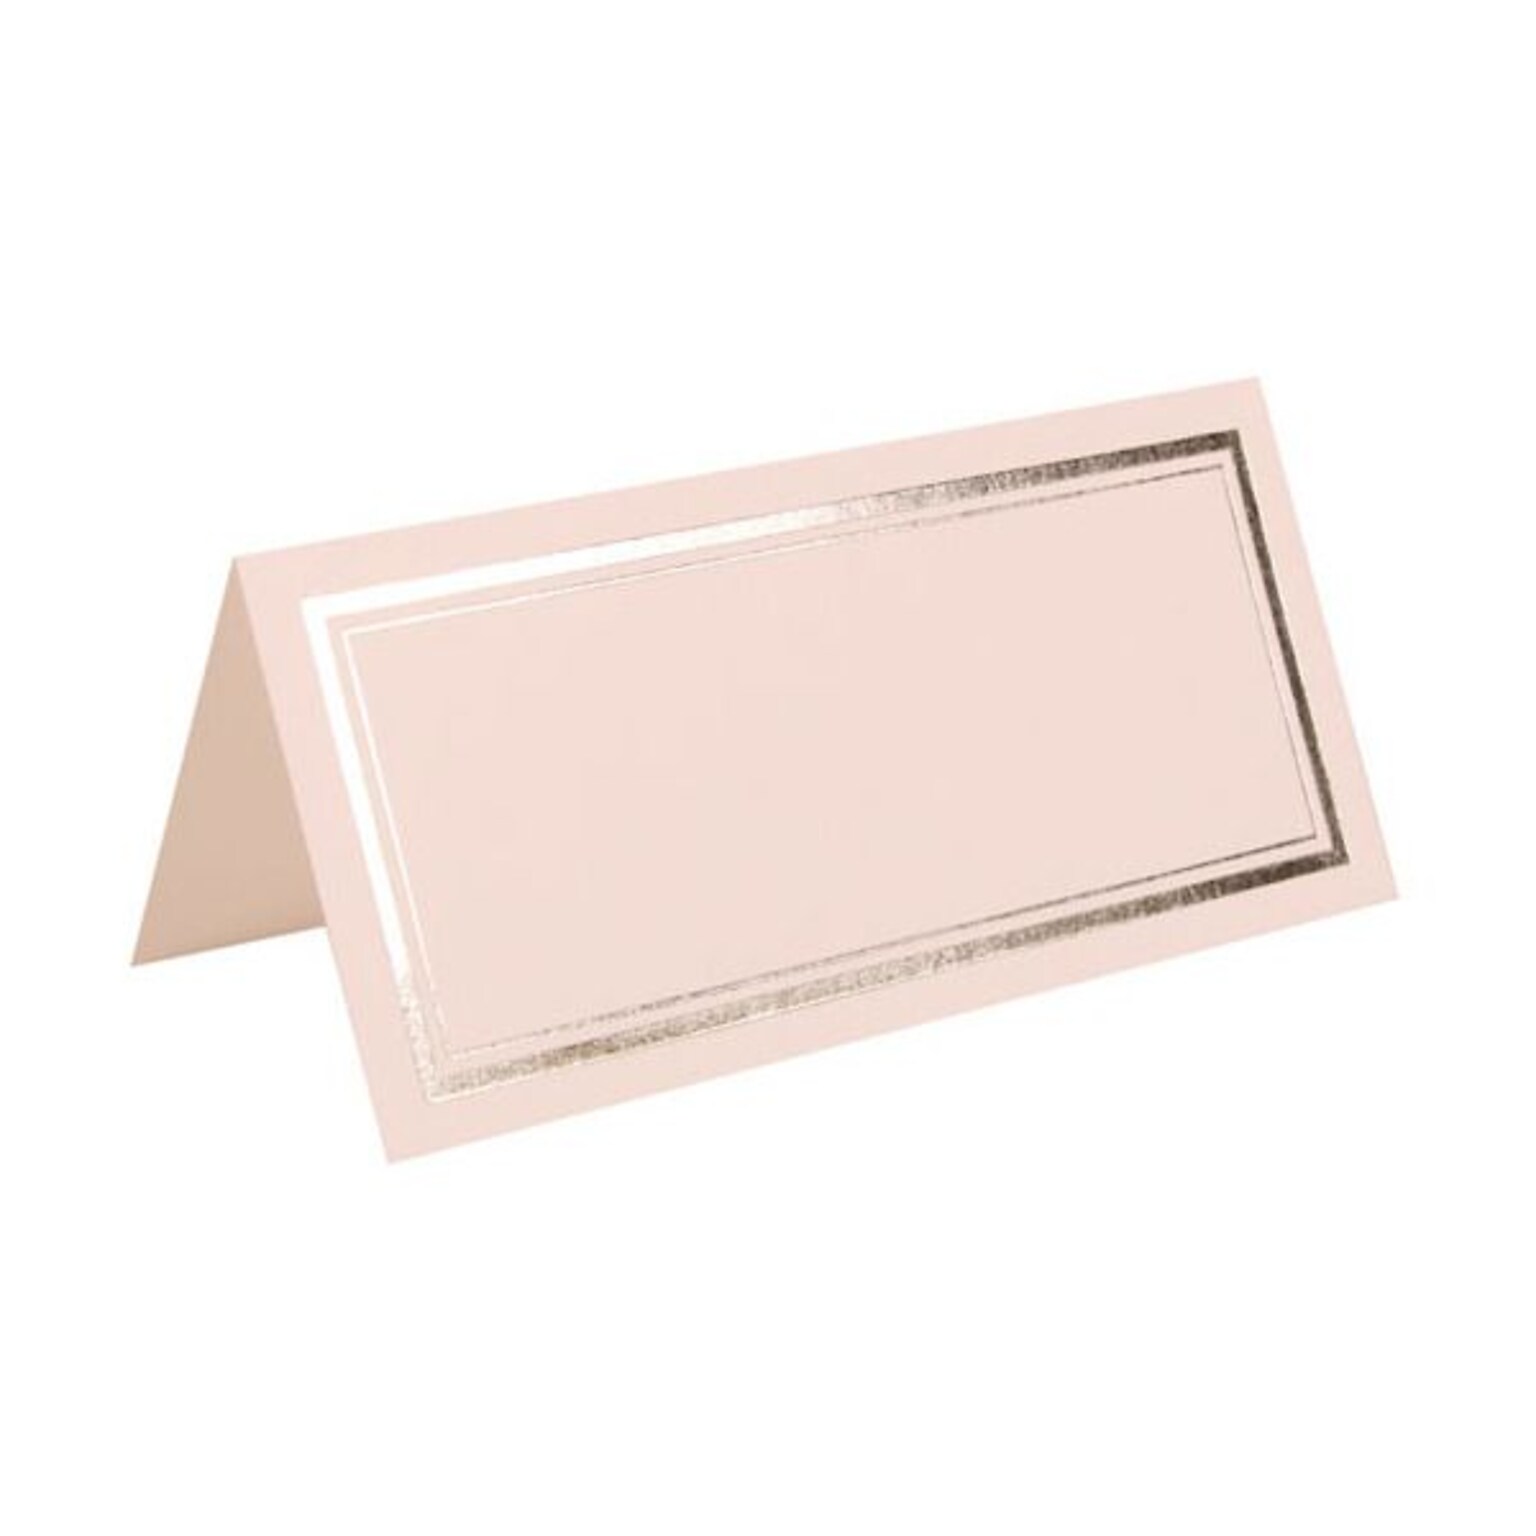 JAM Paper® Foldover Placecards, 2 x 4.25, White with Double Silver Border place cards, 100/pack (312125230)